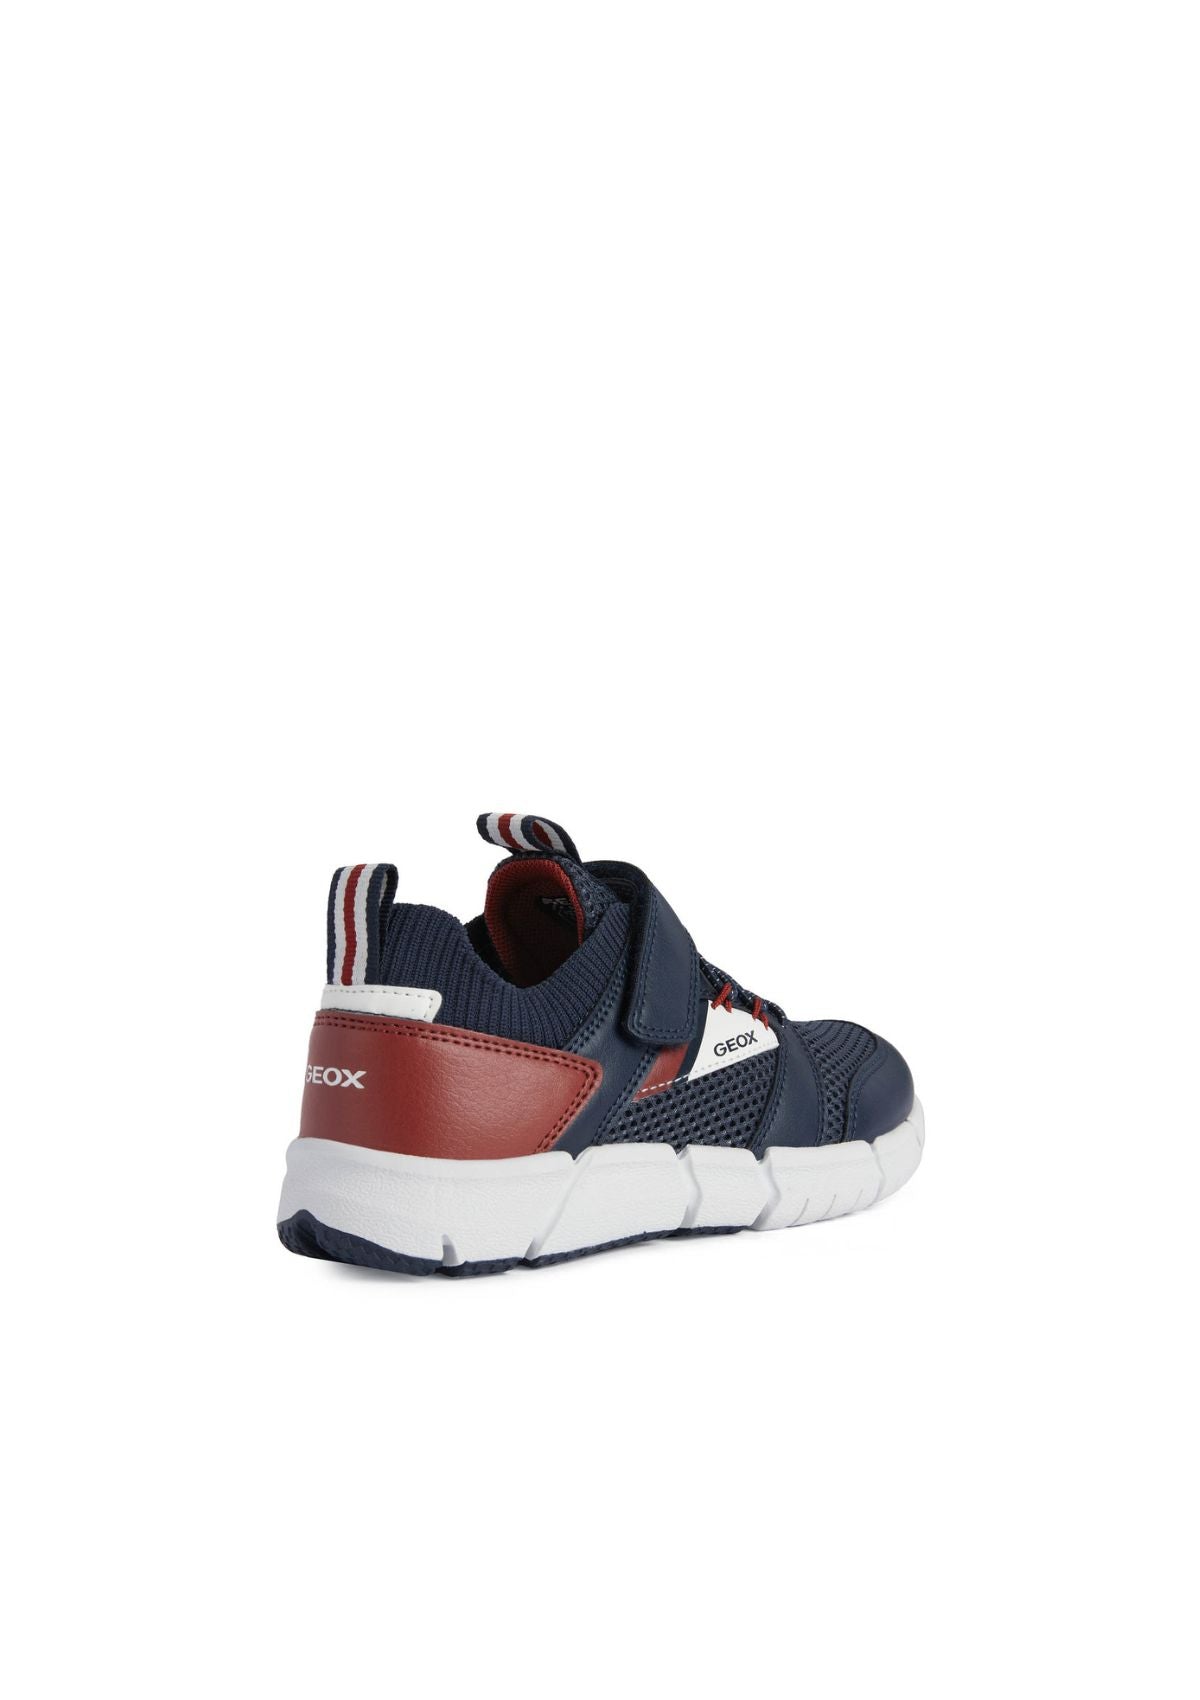 Geox Boys Trainers FLEXYPER Navy Red side back